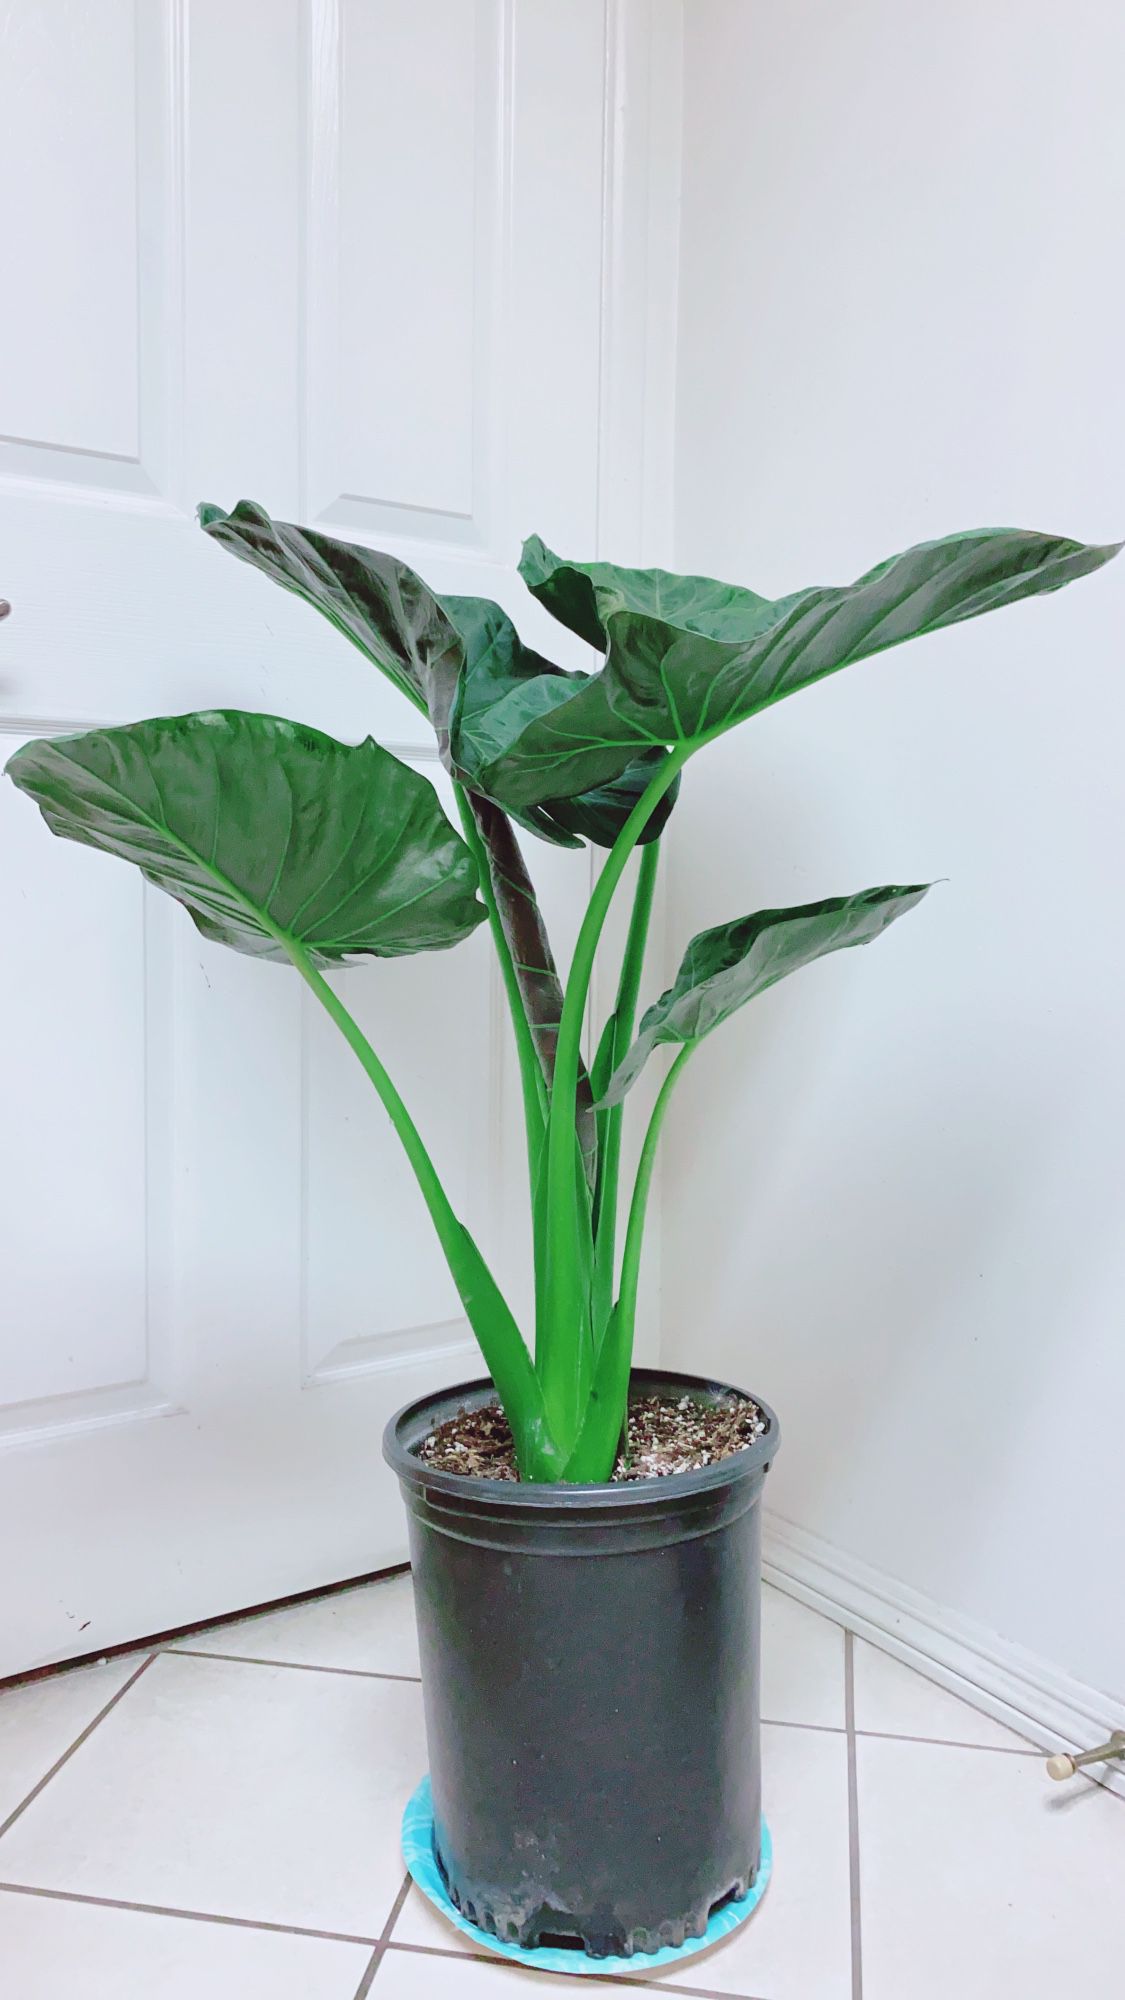 Extra Large Alocasia “ Regal Shields/Elephant Ear Plant ” 3’4” Tall/5 Gallon Container - MORE BIGGER IN PERSON 